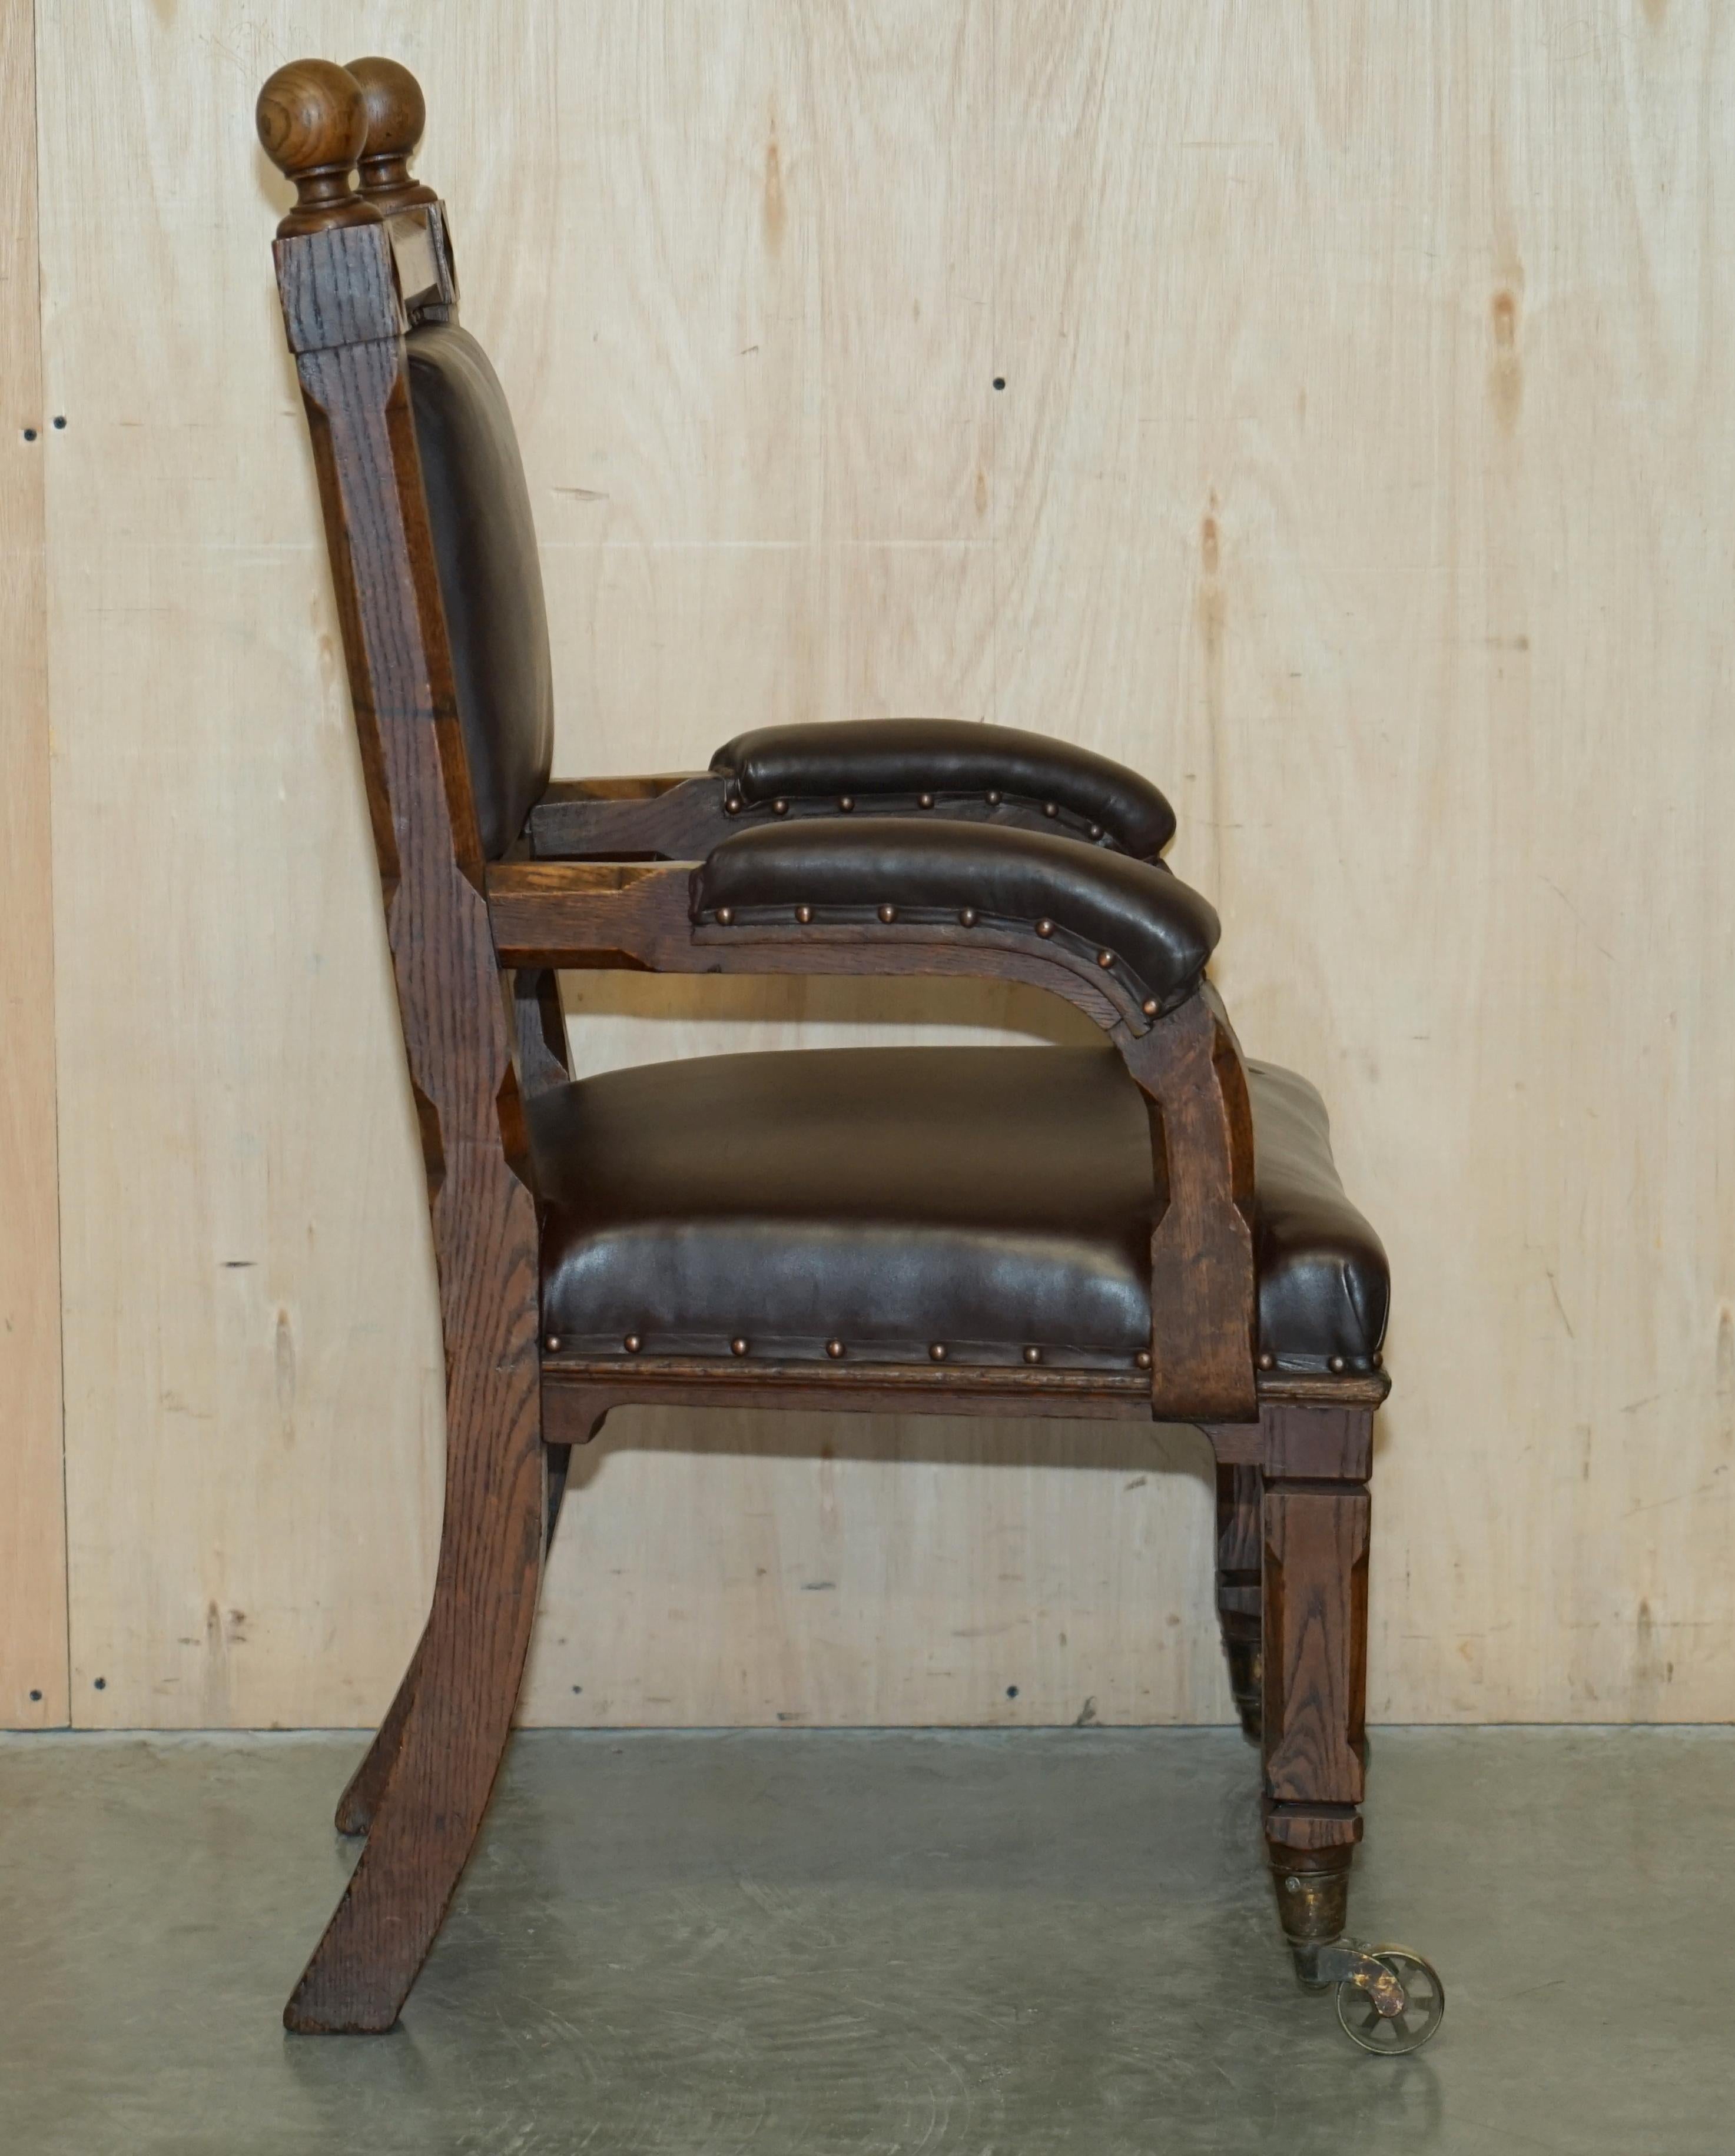 STUNNING ANTIQUE CIRCA 1880 GOTHIC REViVAL OAK PUGIN STYLE CARVER ARMCHAIR For Sale 7